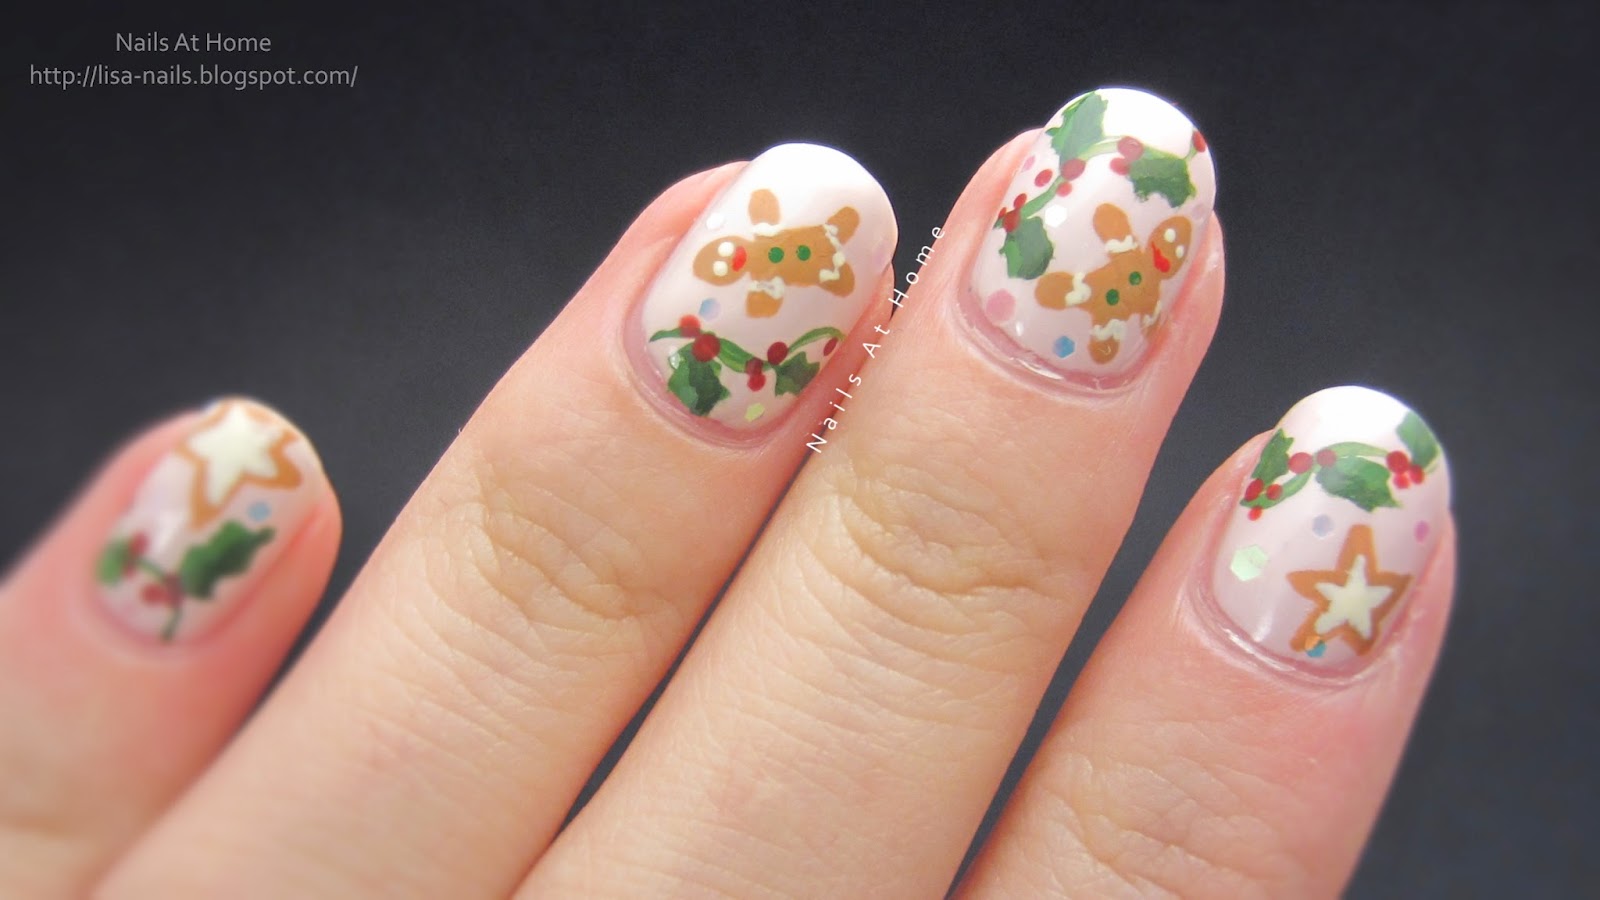 6. "Gingerbread Man Nails" - wide 2